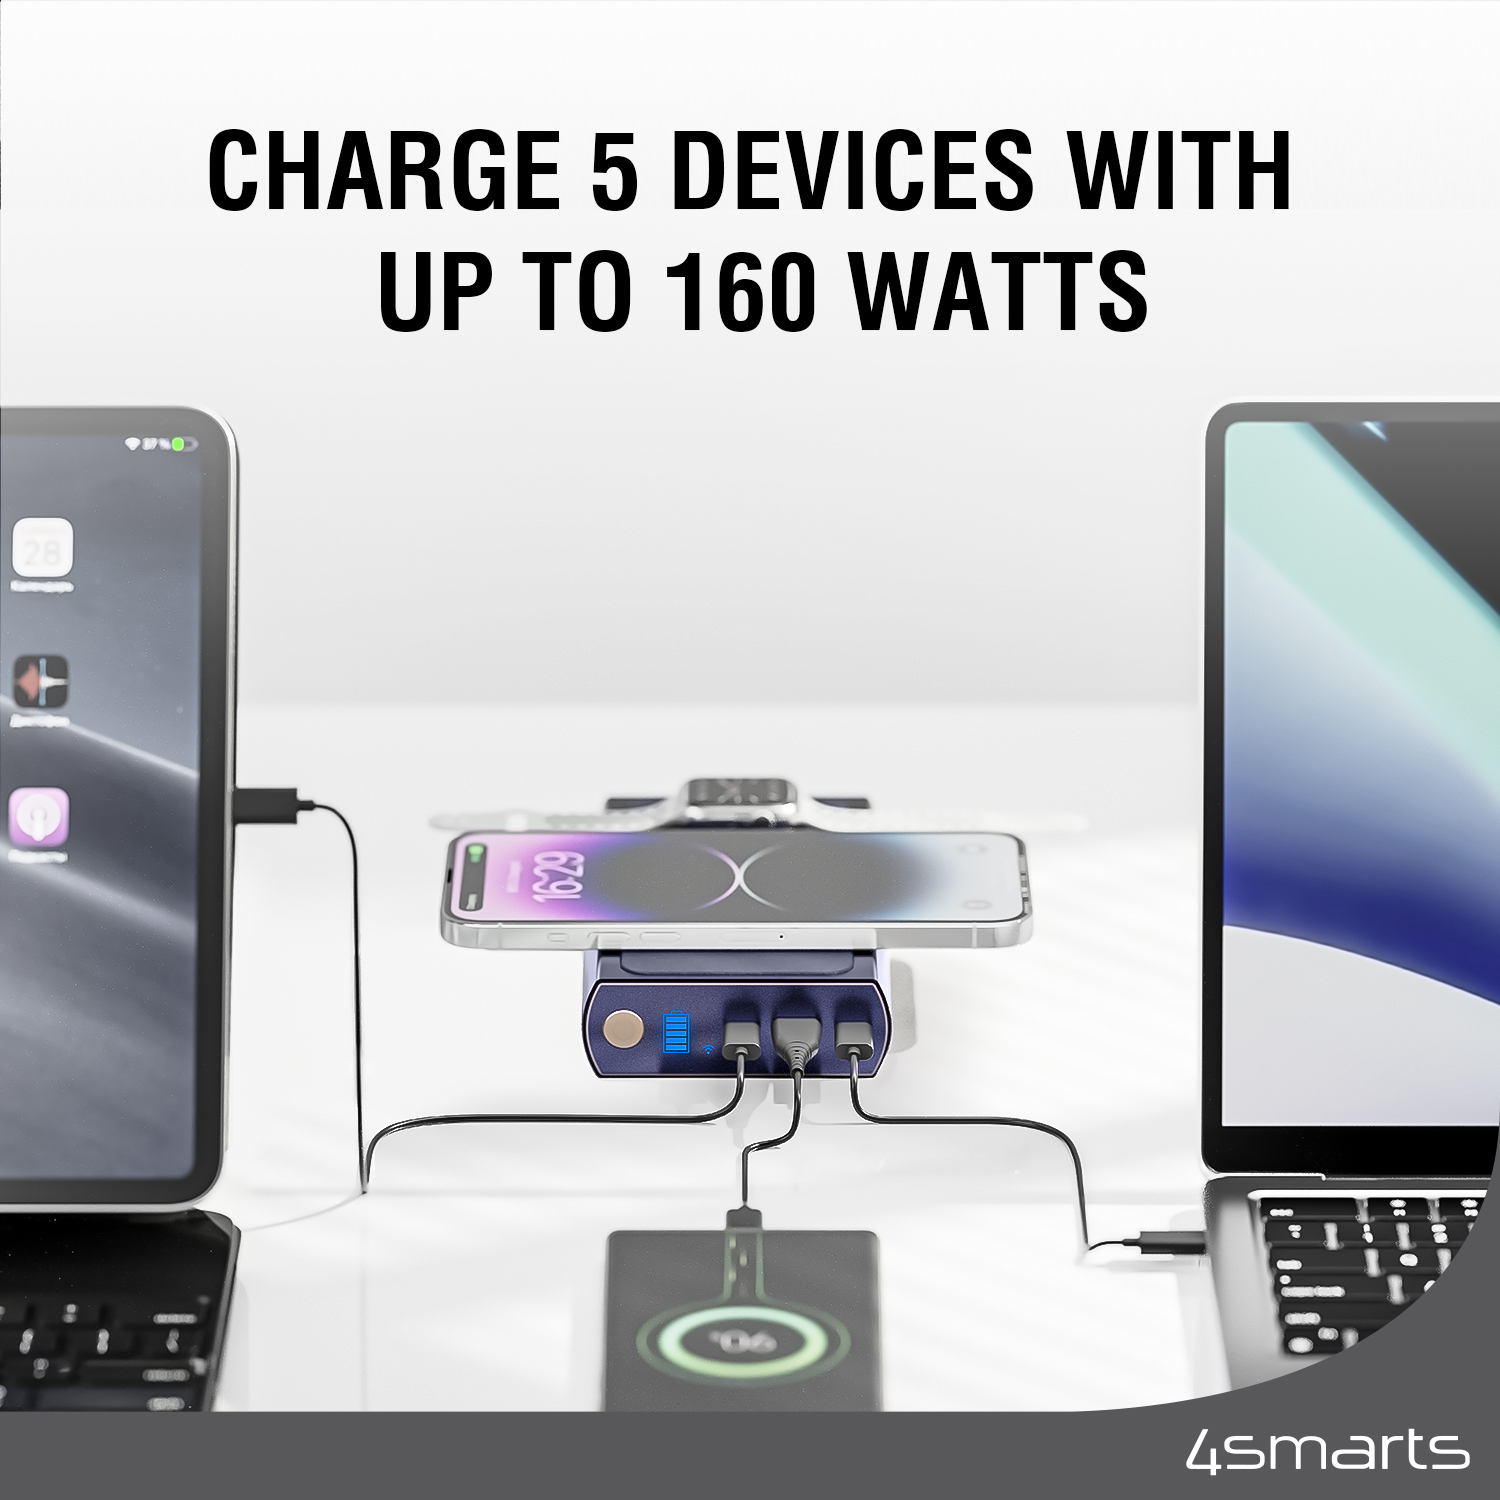 With up to 160W of power, this 4smarts powerbank is up to 10 times more powerful.